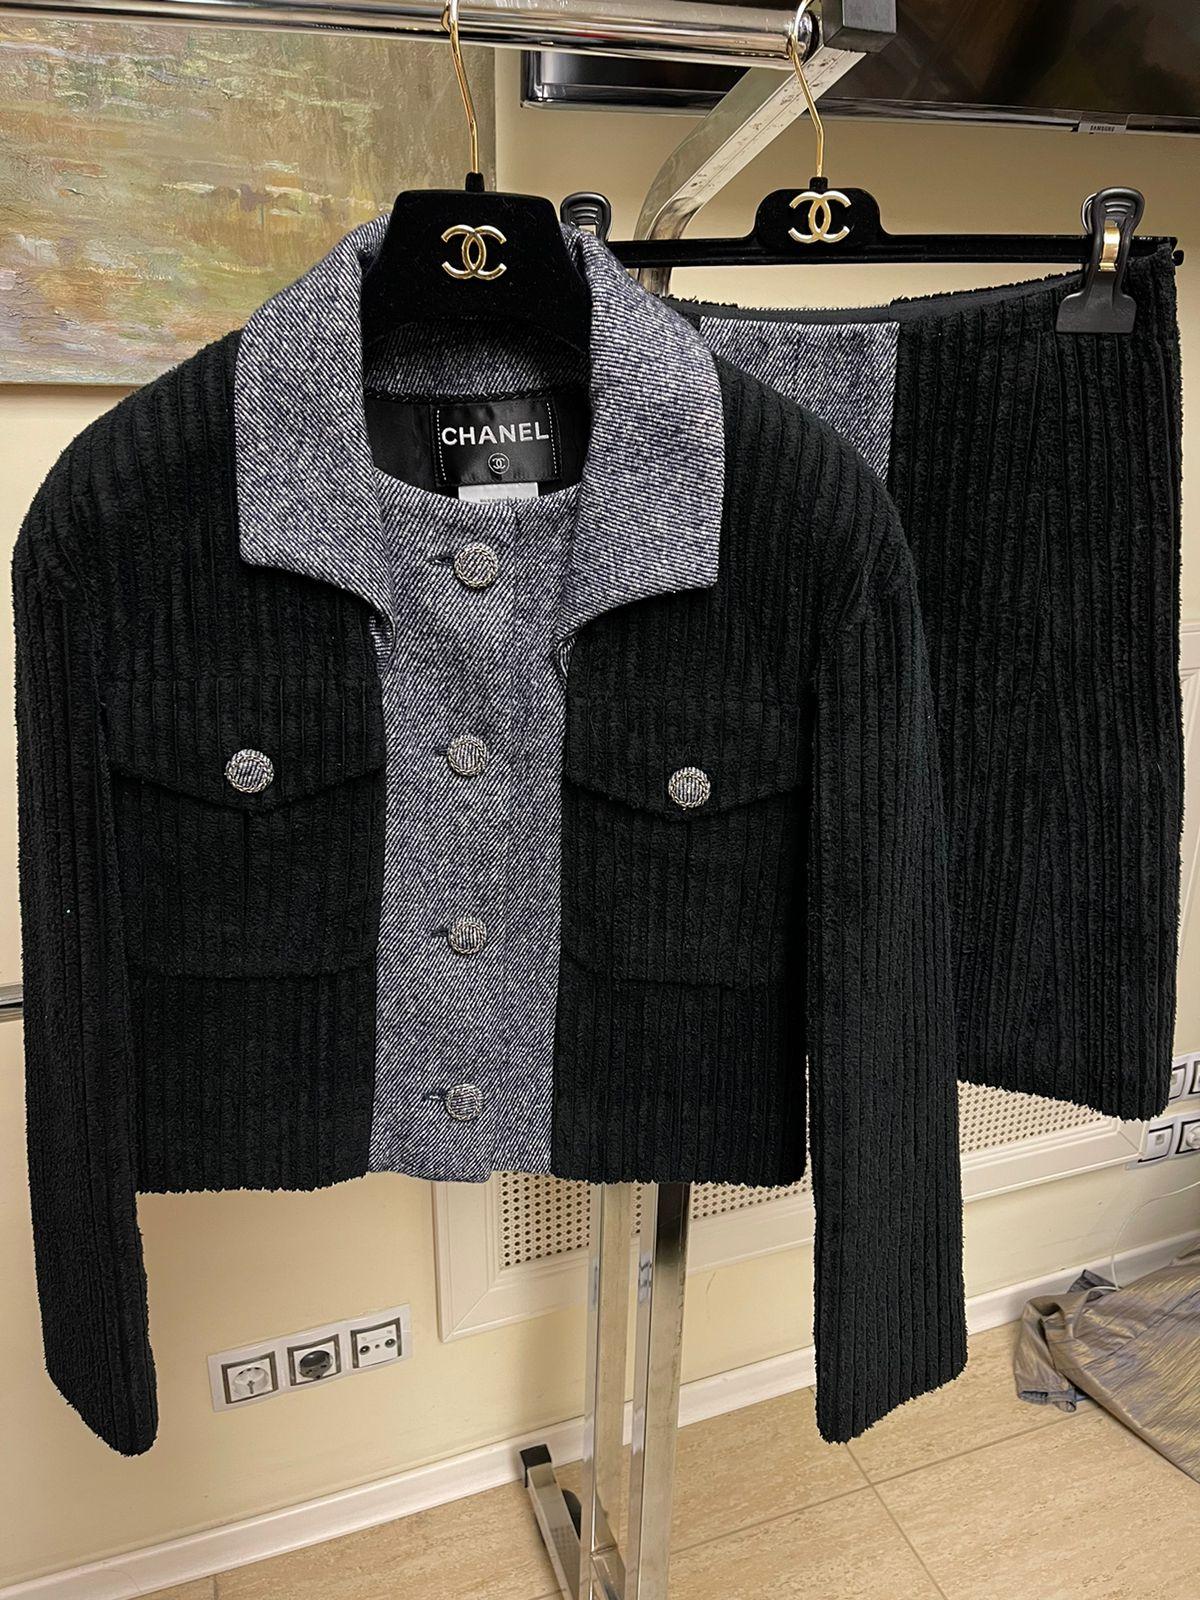 New Chanel suit in black velvet and grey tweed. On-trend giant rib texture.
Chic and sophisticated style!
- CC logo buttons
- black silk lining
Size mark 36 FR.